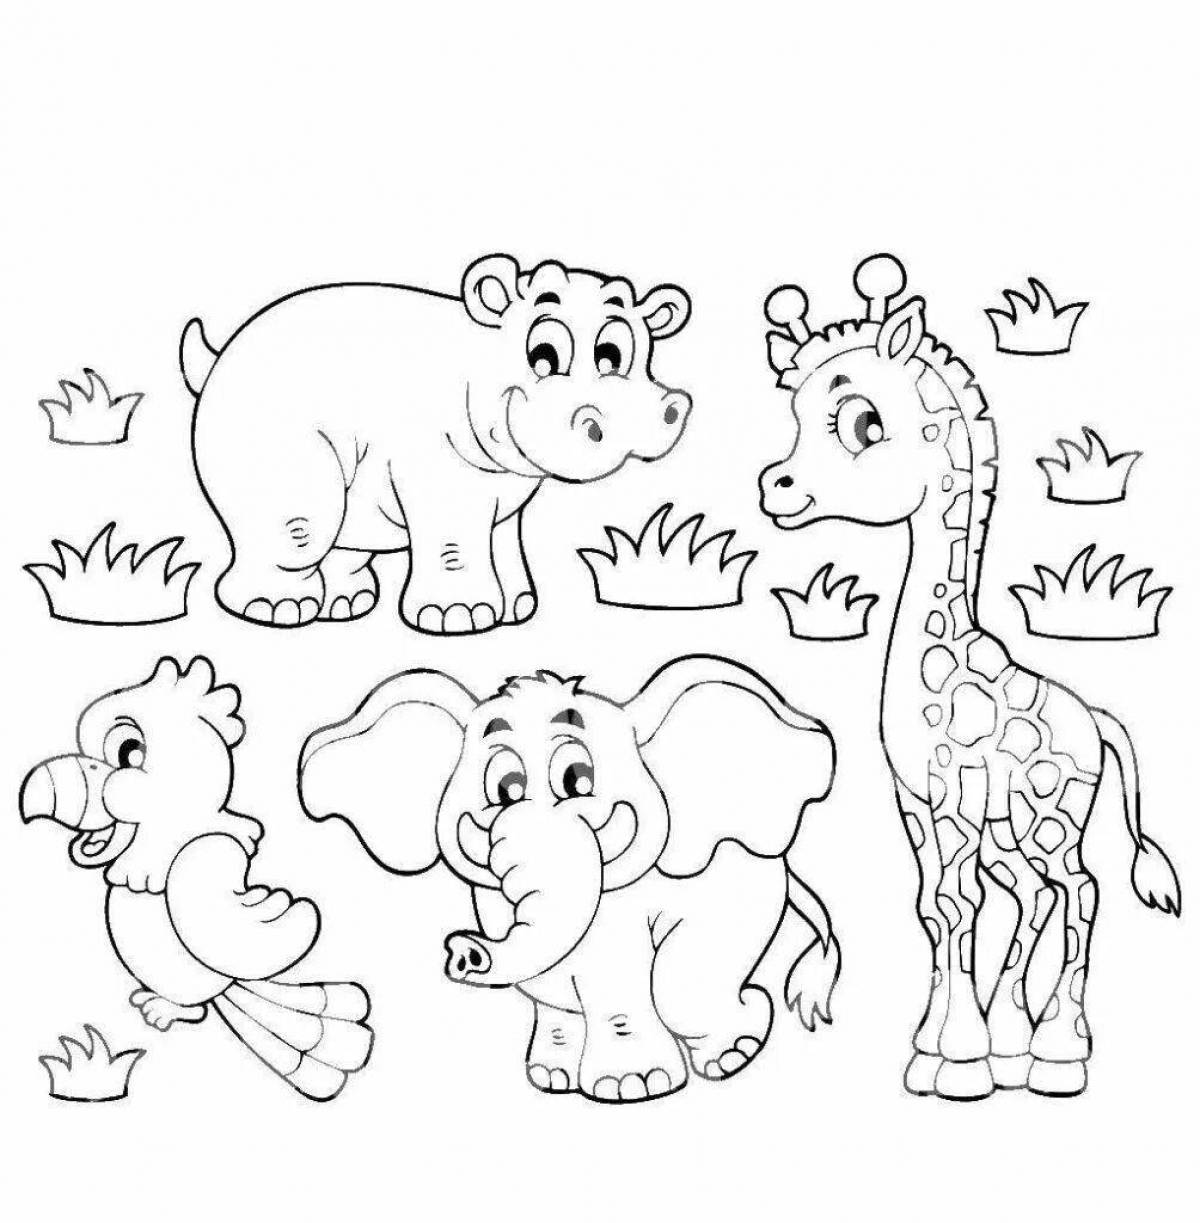 Exotic coloring pages animals of hot countries for children 5-6 years old